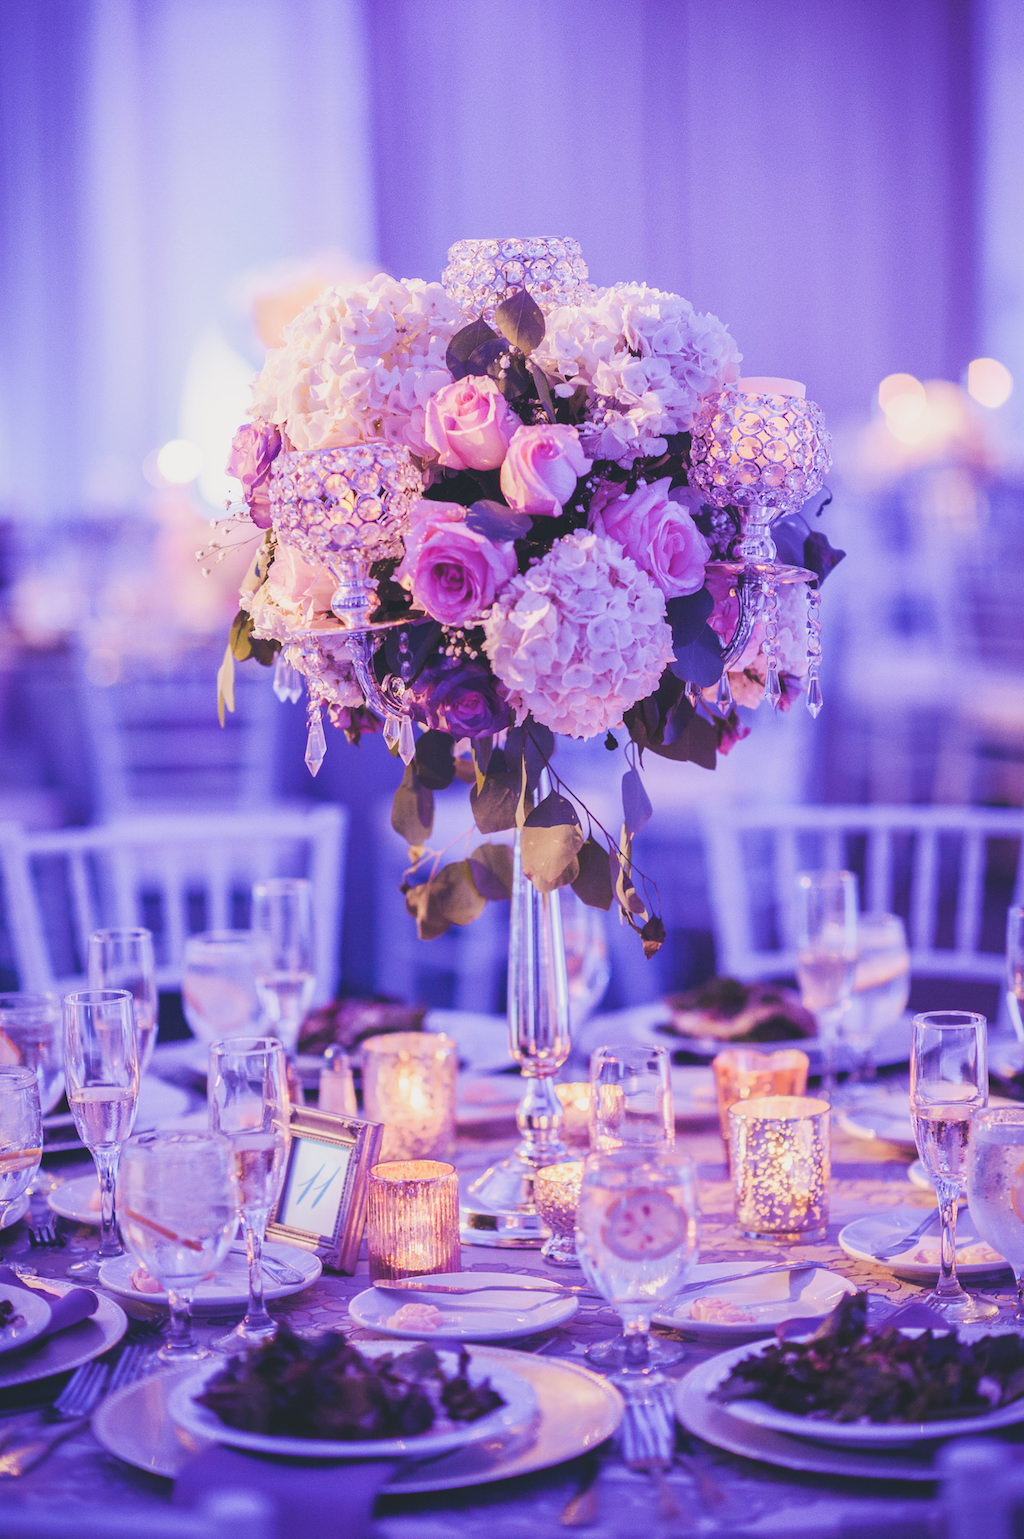 Modern Violet Wedding Reception Pink and White With Glass Beads and Greenery Centerpiece in Tall Glass Vase | Tampa Bay Wedding Planner Special Moments Event Planning